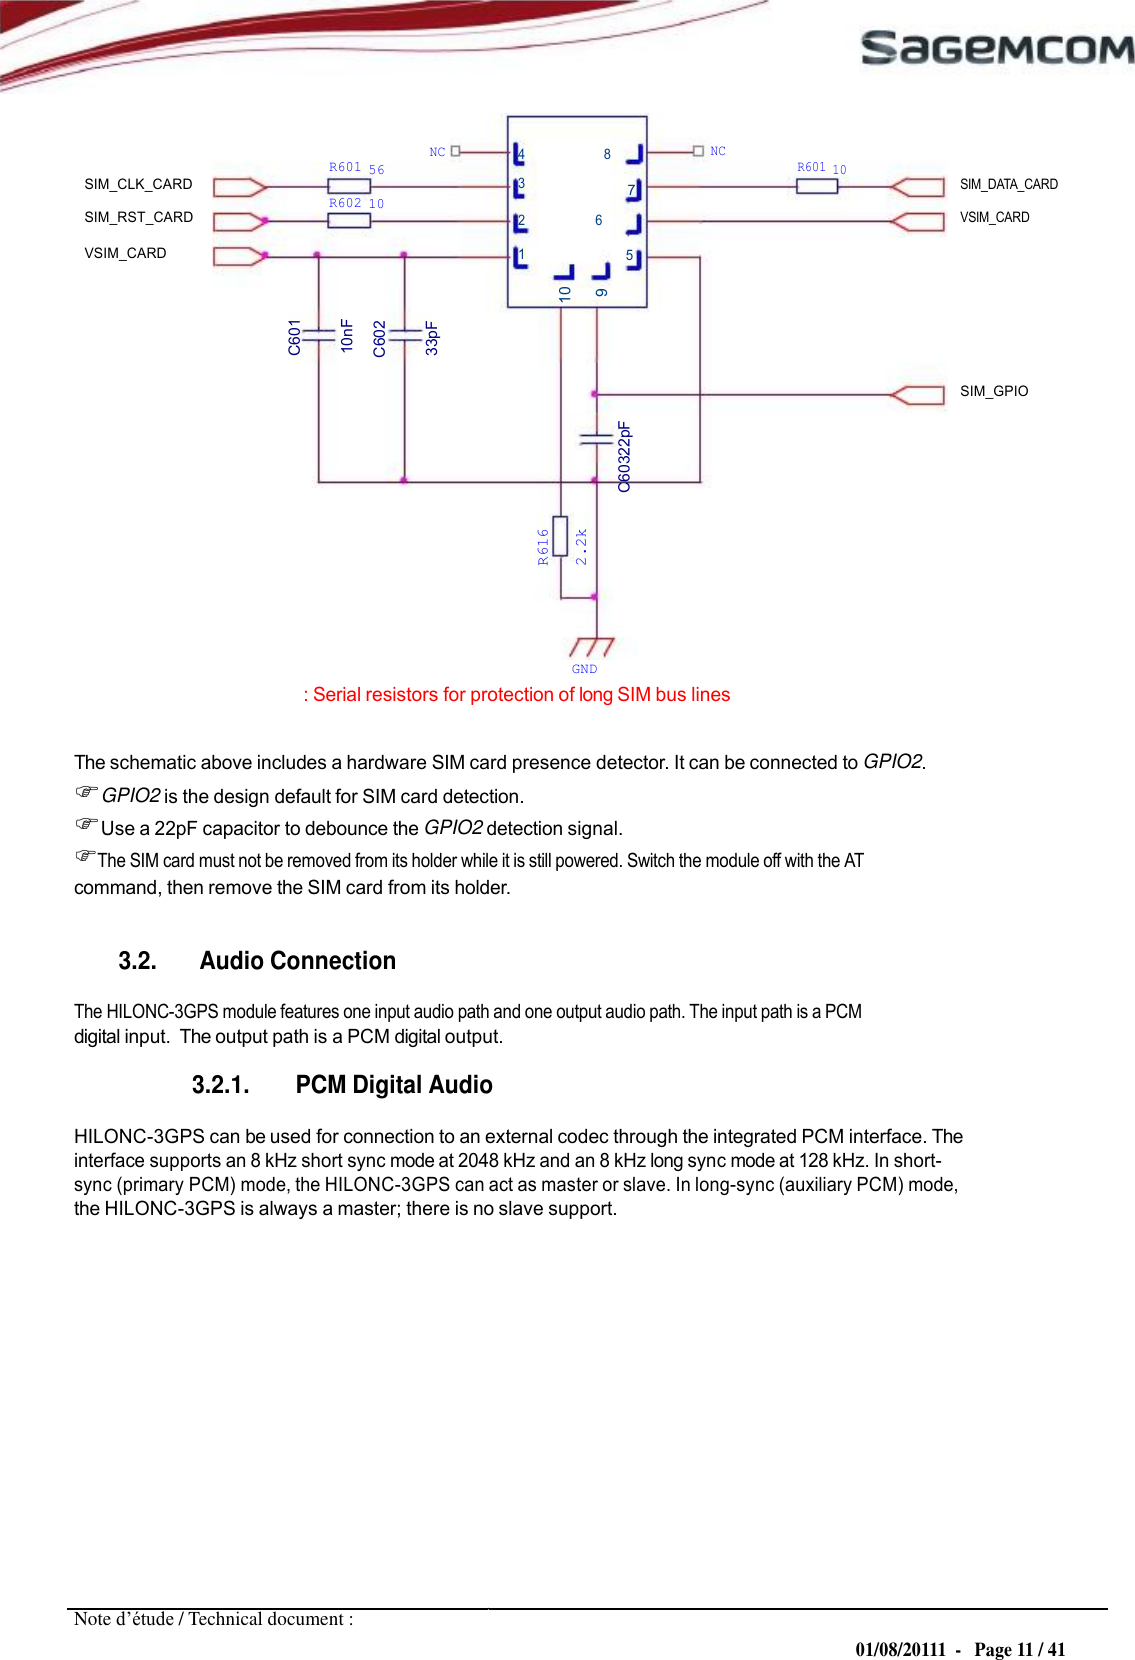 10 C601 10nF C602 33pF 9 R616 2.2k C60322pF 7  URD1– OTL 5696.1– 022 /  72740  Edition 0.4 HILONC- 3GPS APPLICATION NOTE         SIM_CLK_CARD SIM_RST_CARD        R601  56 R602  10        NC        4               8 3 2                       6        NC        R601  10         SIM_DATA_CARD VSIM_CARD VSIM_CARD 1 5     SIM_GPIO           GND : Serial resistors for protection of long SIM bus lines  The schematic above includes a hardware SIM card presence detector. It can be connected to GPIO2. GPIO2 is the design default for SIM card detection. Use a 22pF capacitor to debounce the GPIO2 detection signal. The SIM card must not be removed from its holder while it is still powered. Switch the module off with the AT command, then remove the SIM card from its holder.   3.2. Audio Connection  The HILONC-3GPS module features one input audio path and one output audio path. The input path is a PCM digital input.  The output path is a PCM digital output.  3.2.1. PCM Digital Audio  HILONC-3GPS can be used for connection to an external codec through the integrated PCM interface. The interface supports an 8 kHz short sync mode at 2048 kHz and an 8 kHz long sync mode at 128 kHz. In short- sync (primary PCM) mode, the HILONC-3GPS can act as master or slave. In long-sync (auxiliary PCM) mode, the HILONC-3GPS is always a master; there is no slave support.                Note d’étude / Technical document : 01/08/20111  -   Page 11 / 41 